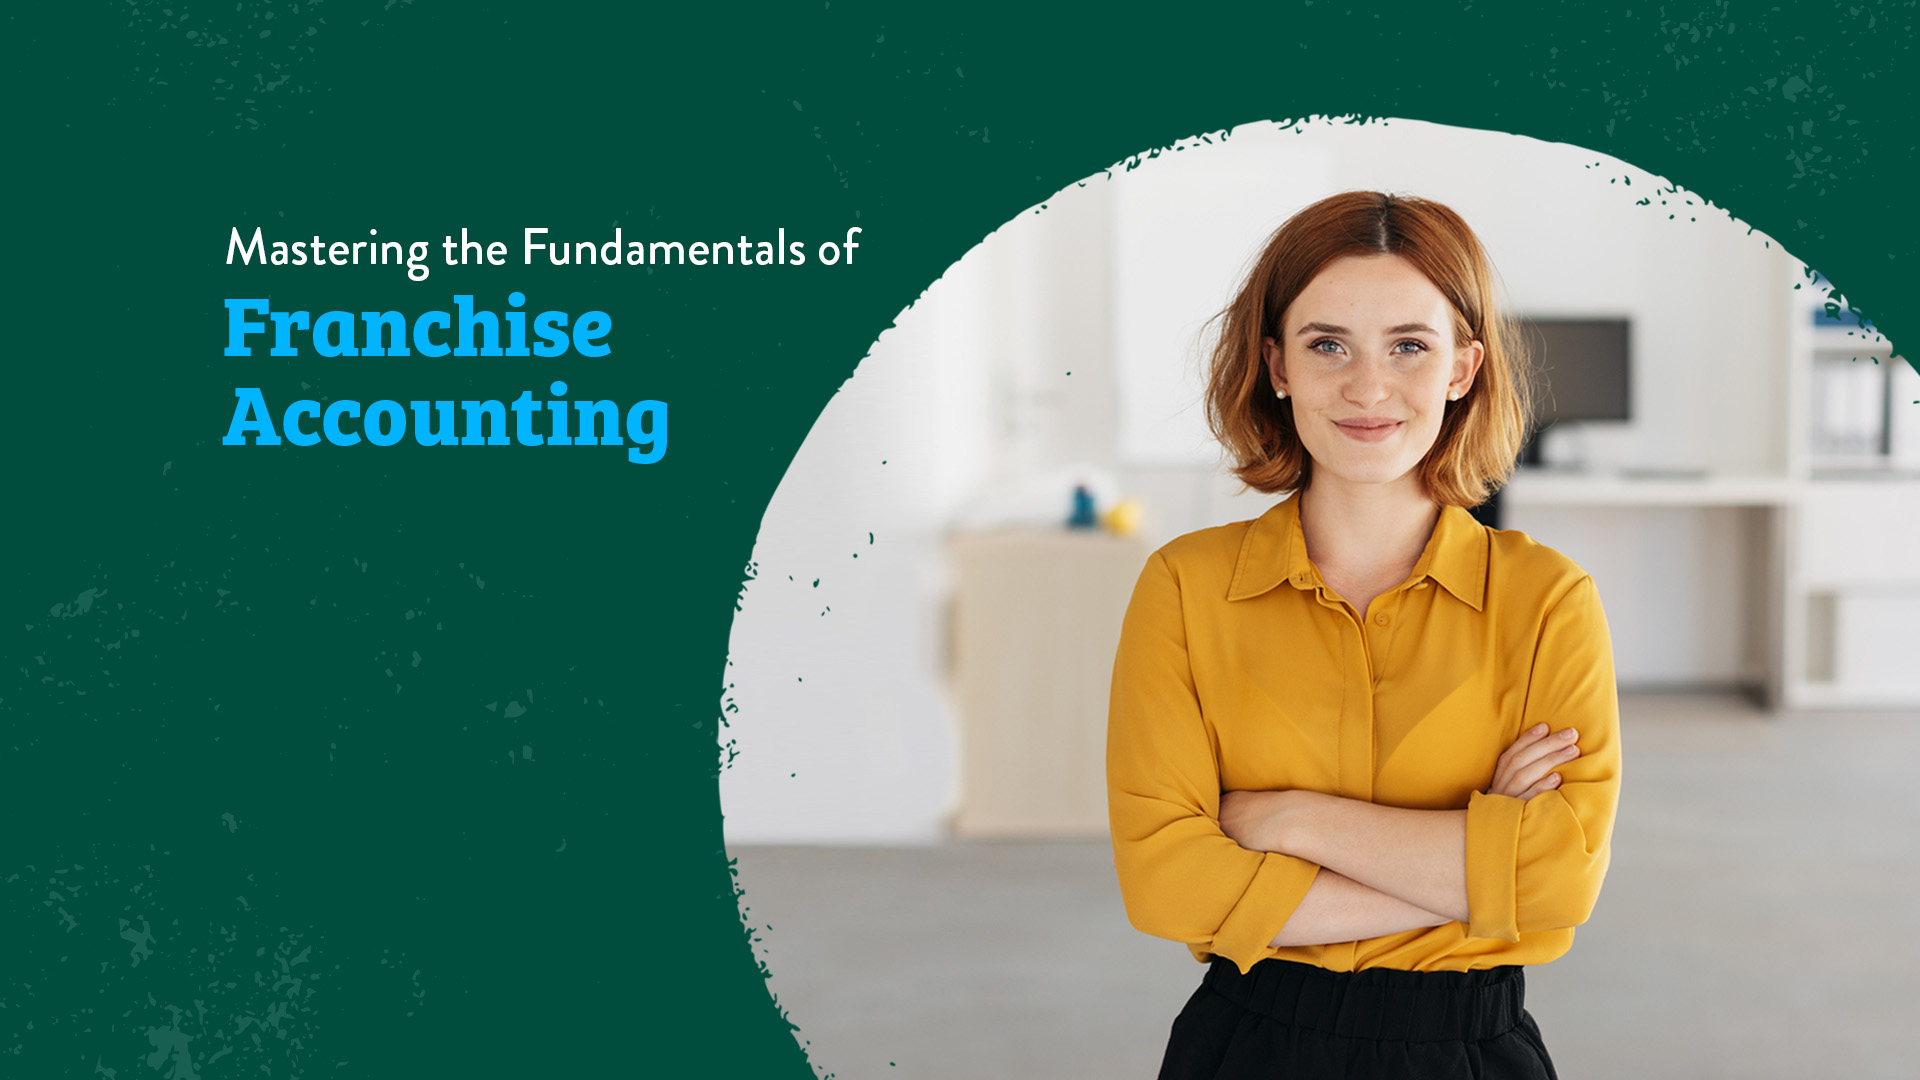 Mastering the Fundamentals of Franchise Accounting